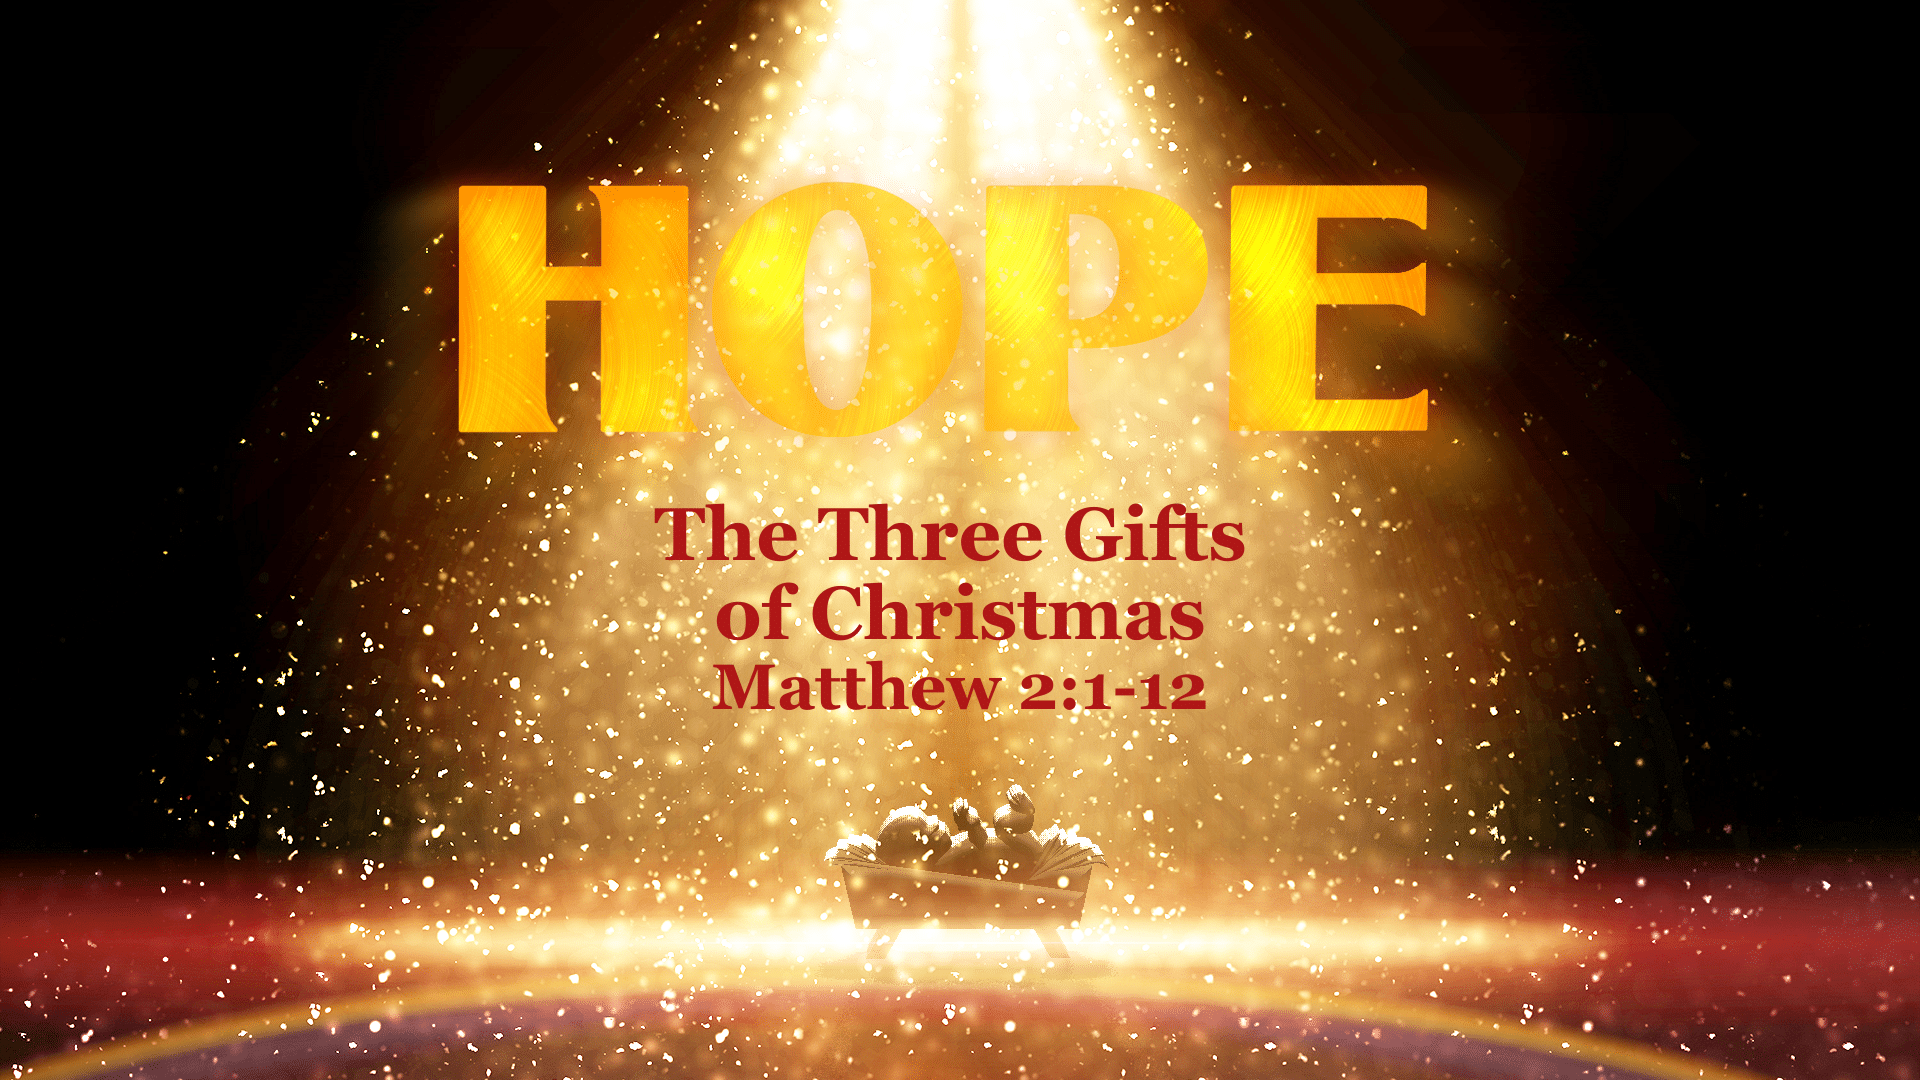 The Three Gifts Of Christmas